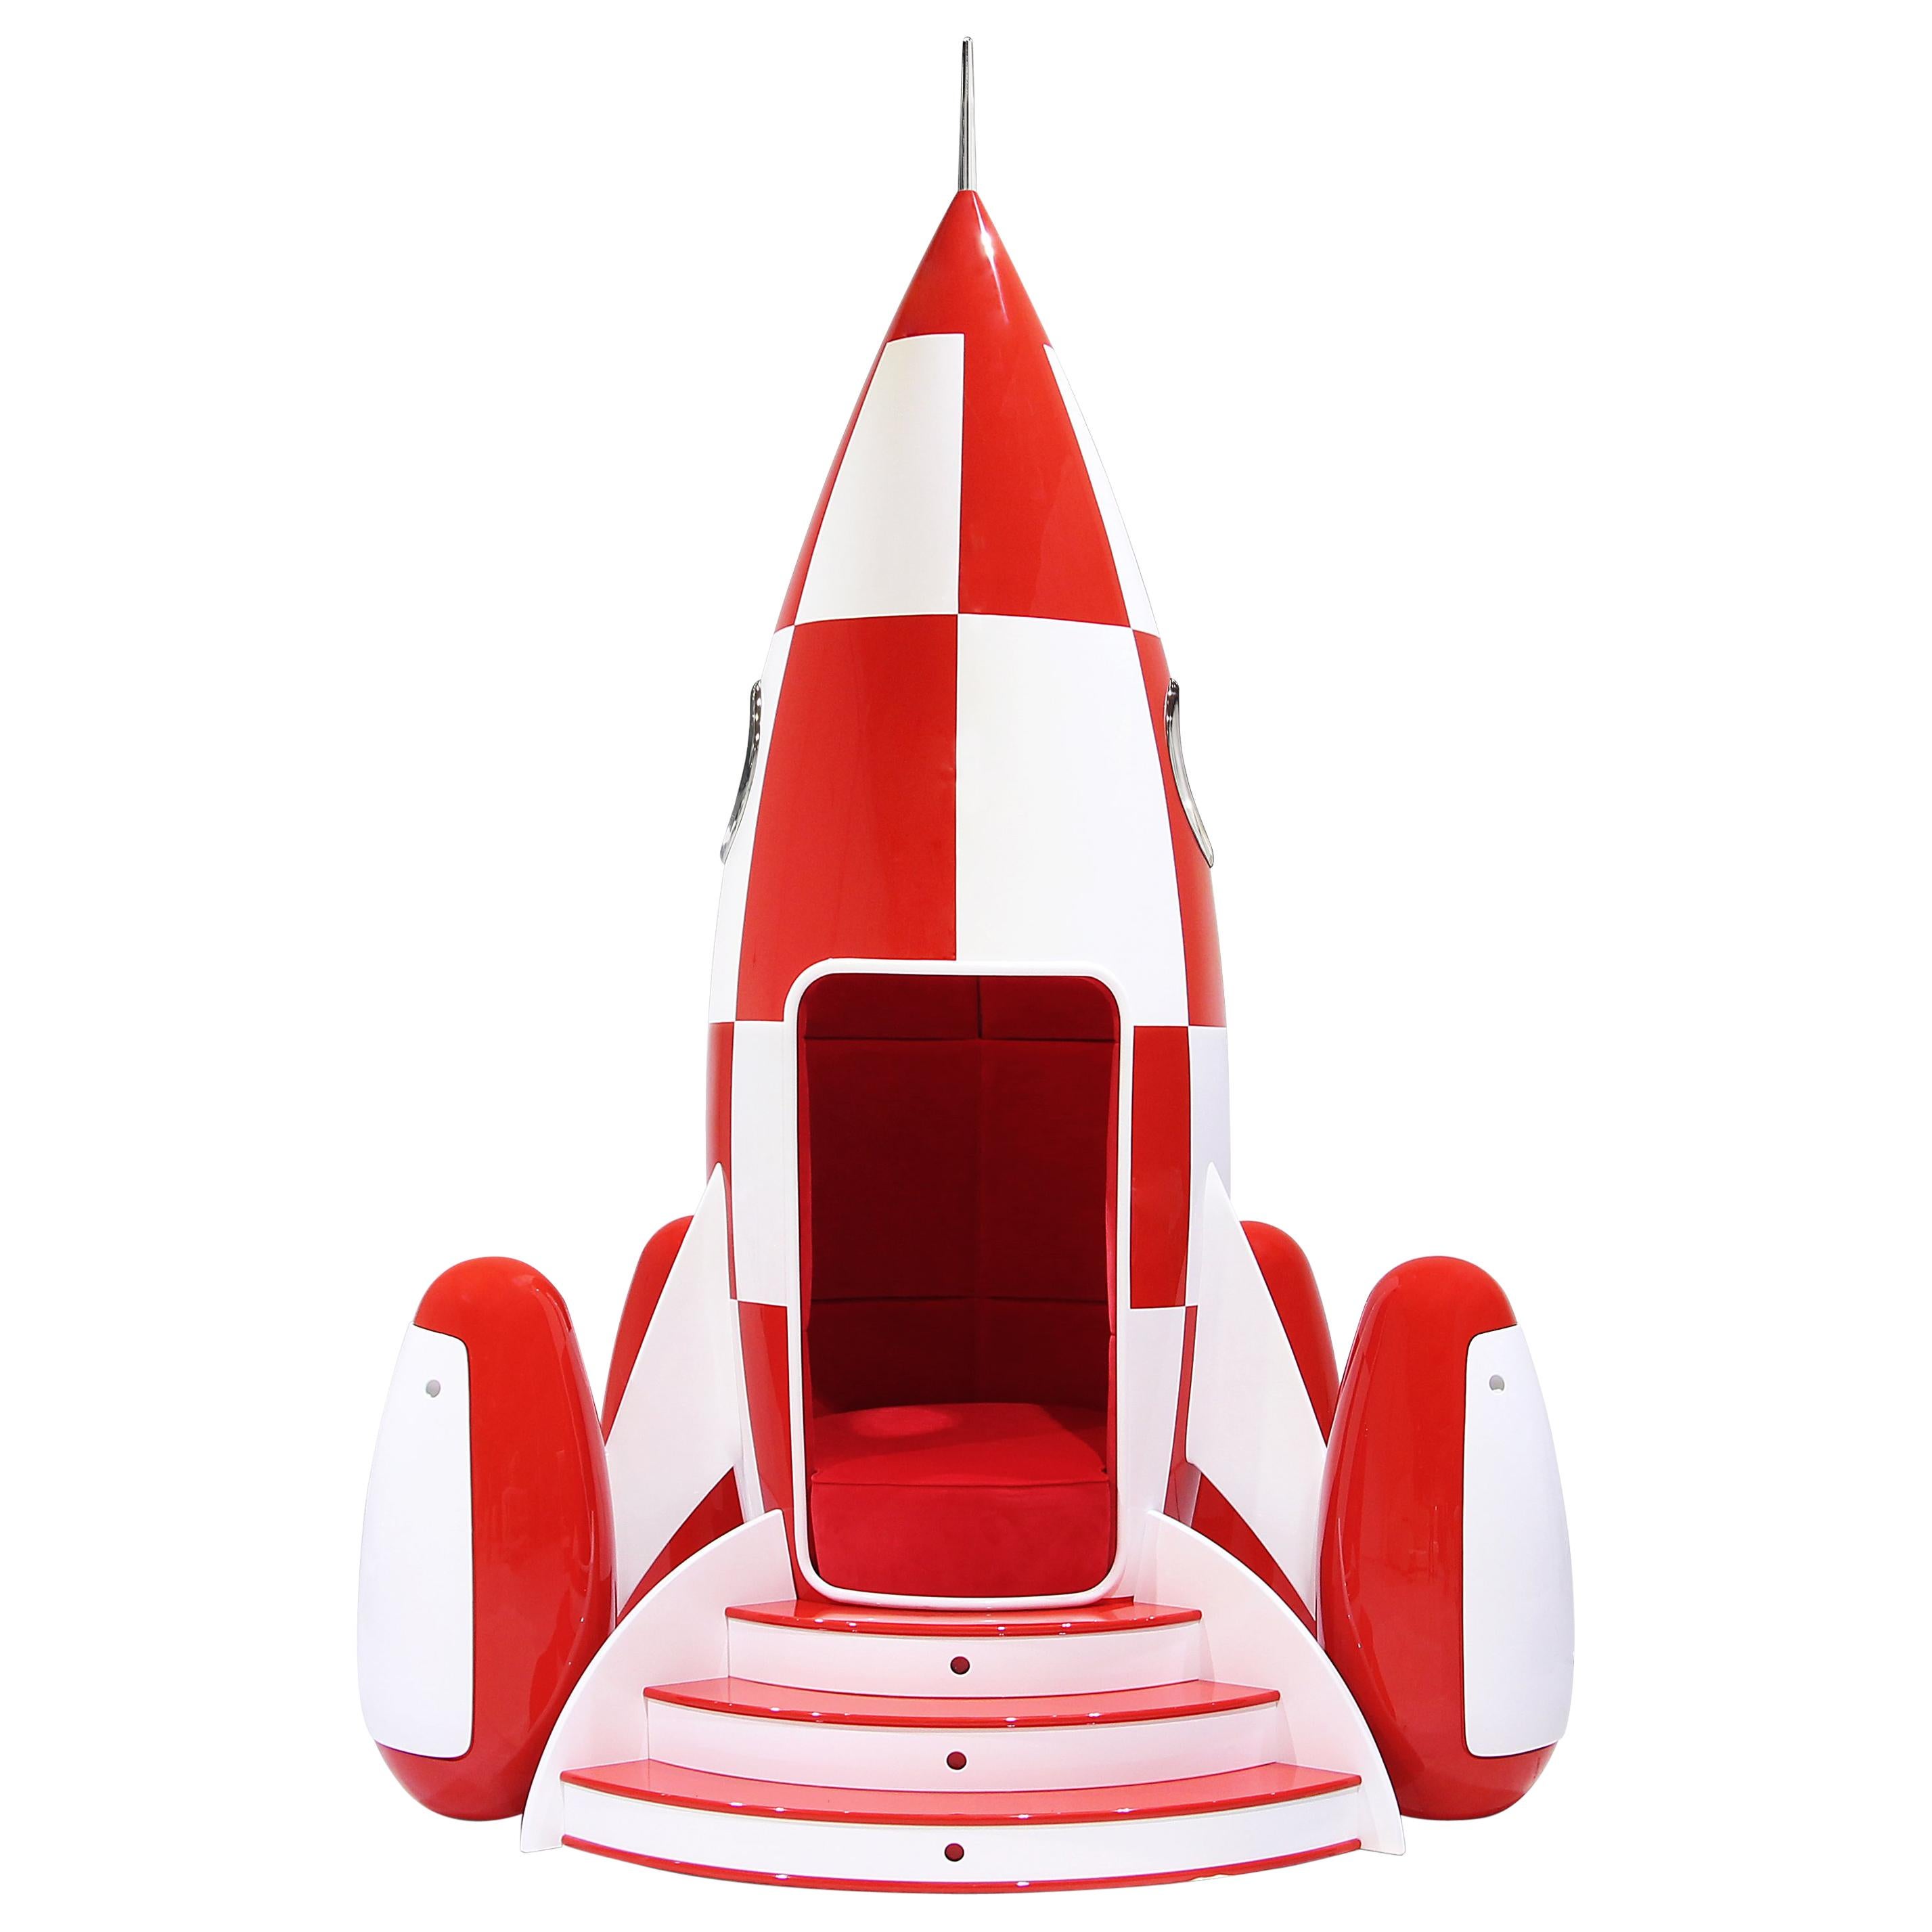 Rocky Rocket Kid's Chair in Red and White by Circu Magical Furniture